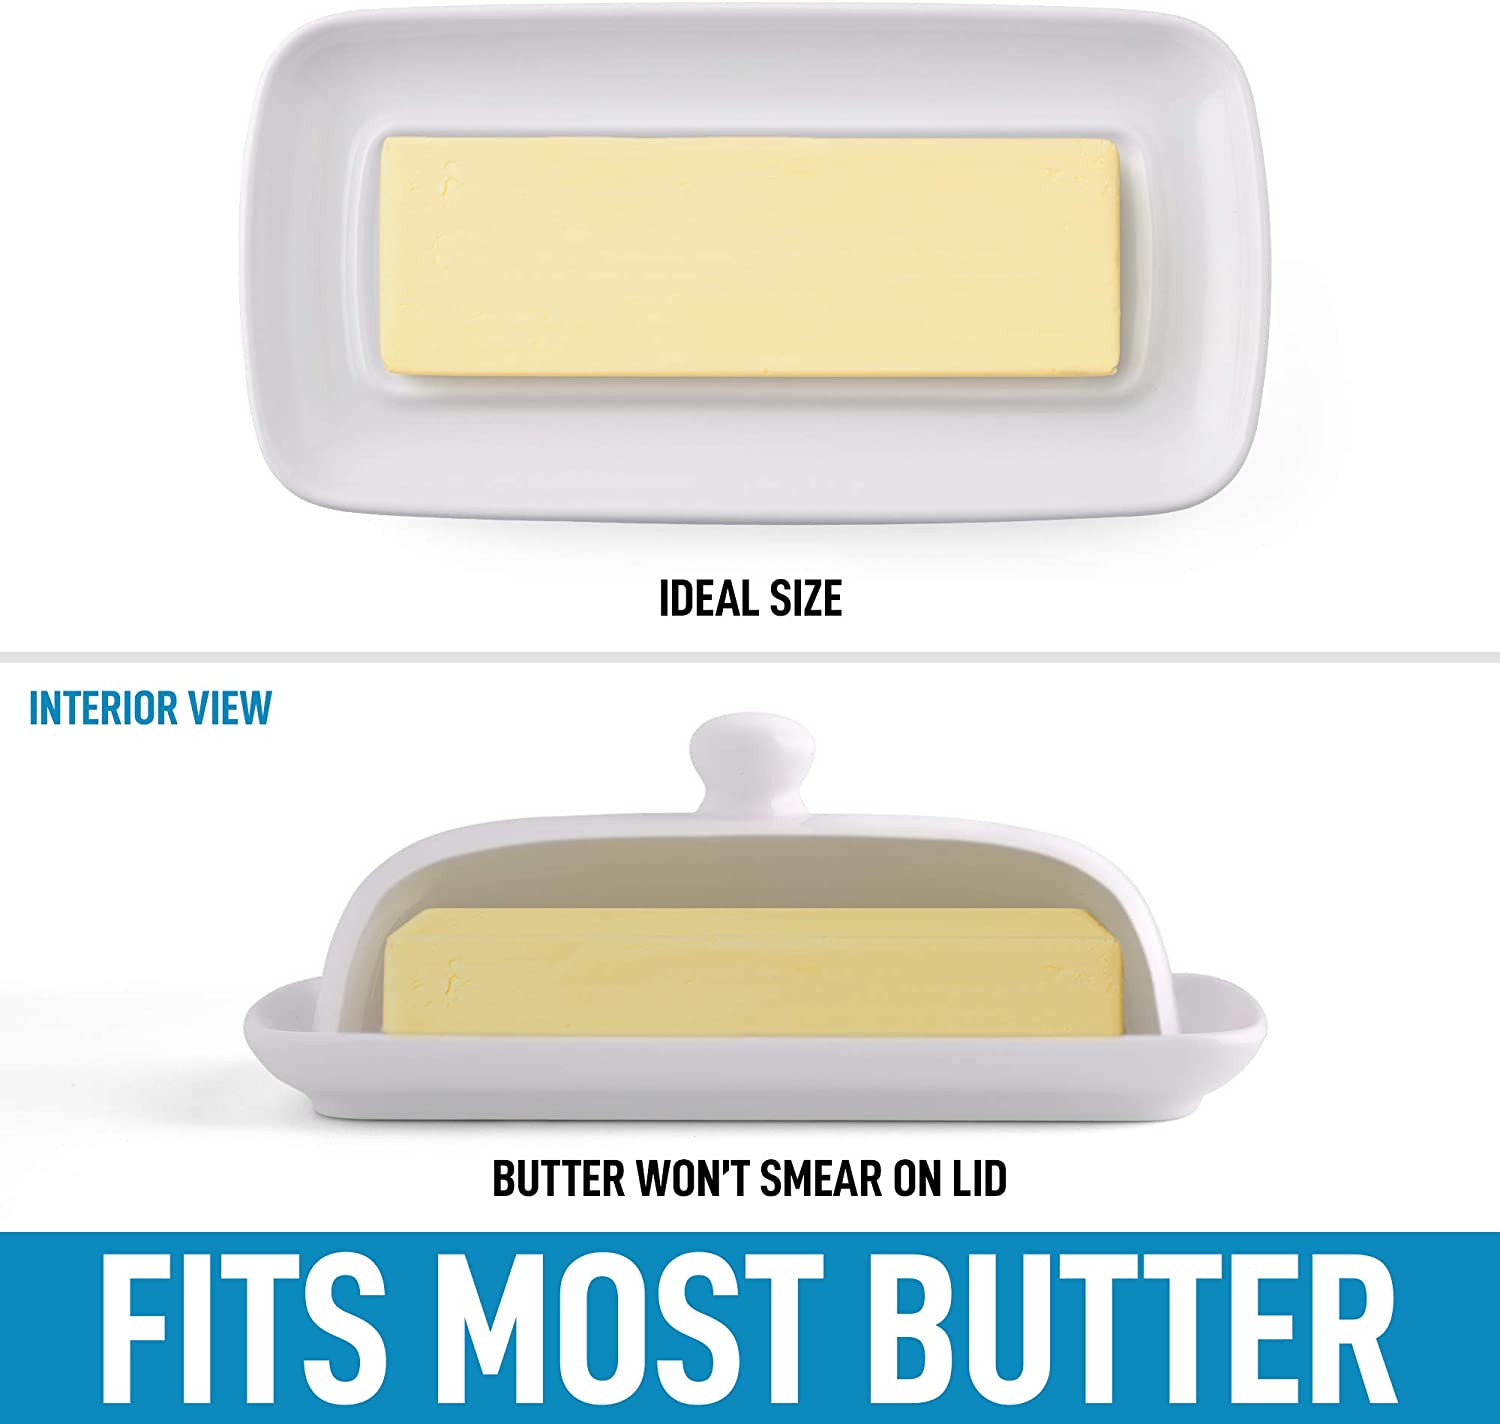 Classic Style Porcelain White Butter Dish With Lid - Zulay KitchenZulay Kitchen